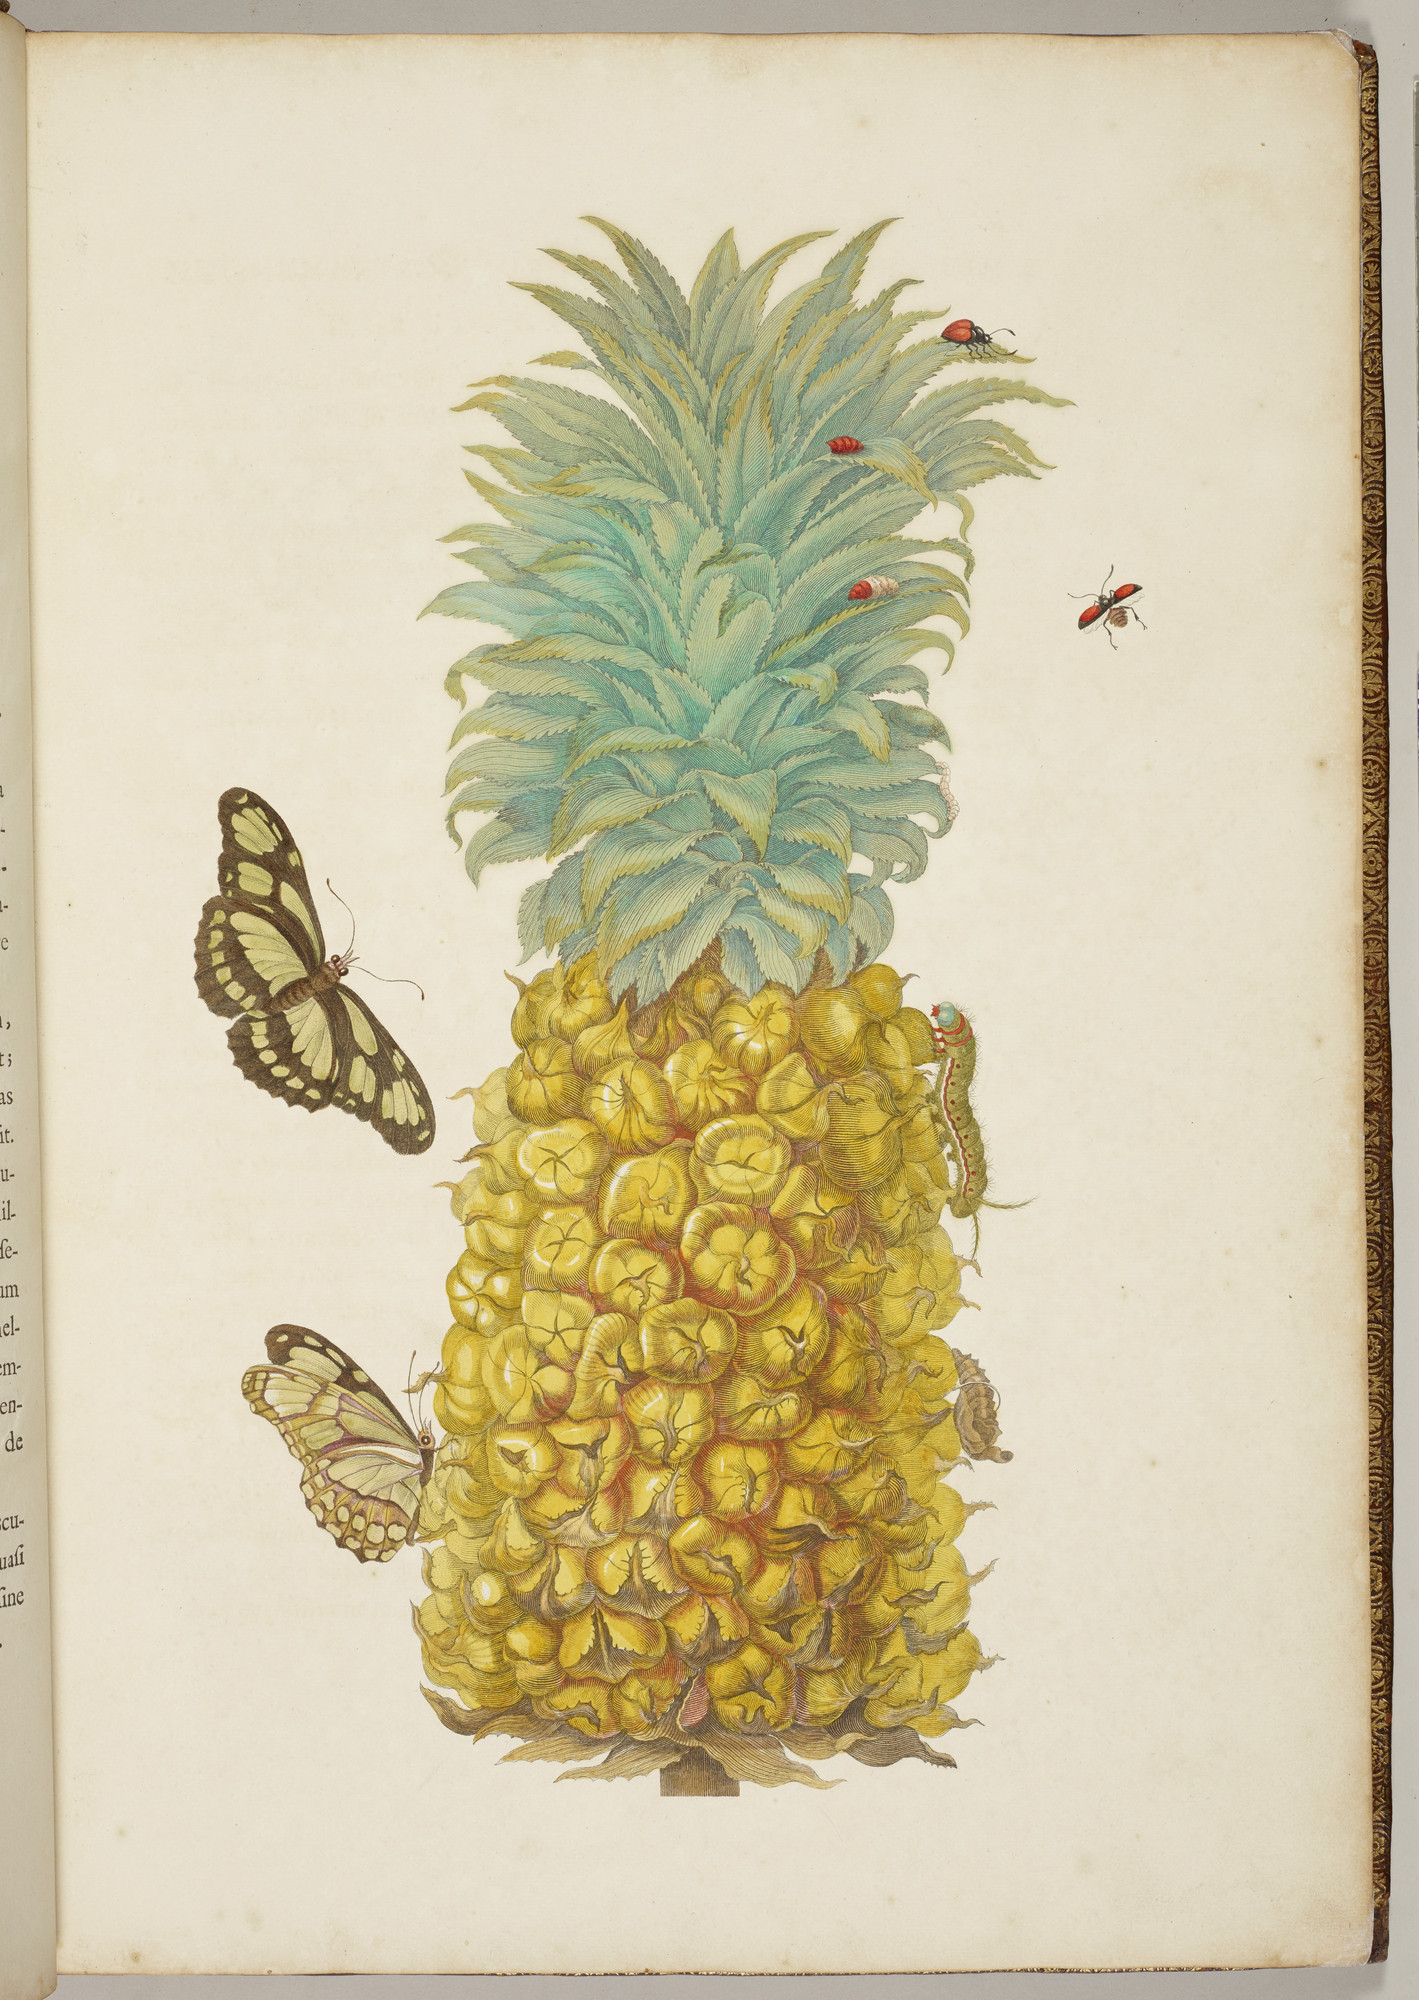 Pineapple by Maria Sibylla Merian - 1705 - 53.0 x 4.0 cm Royal Collection Trust